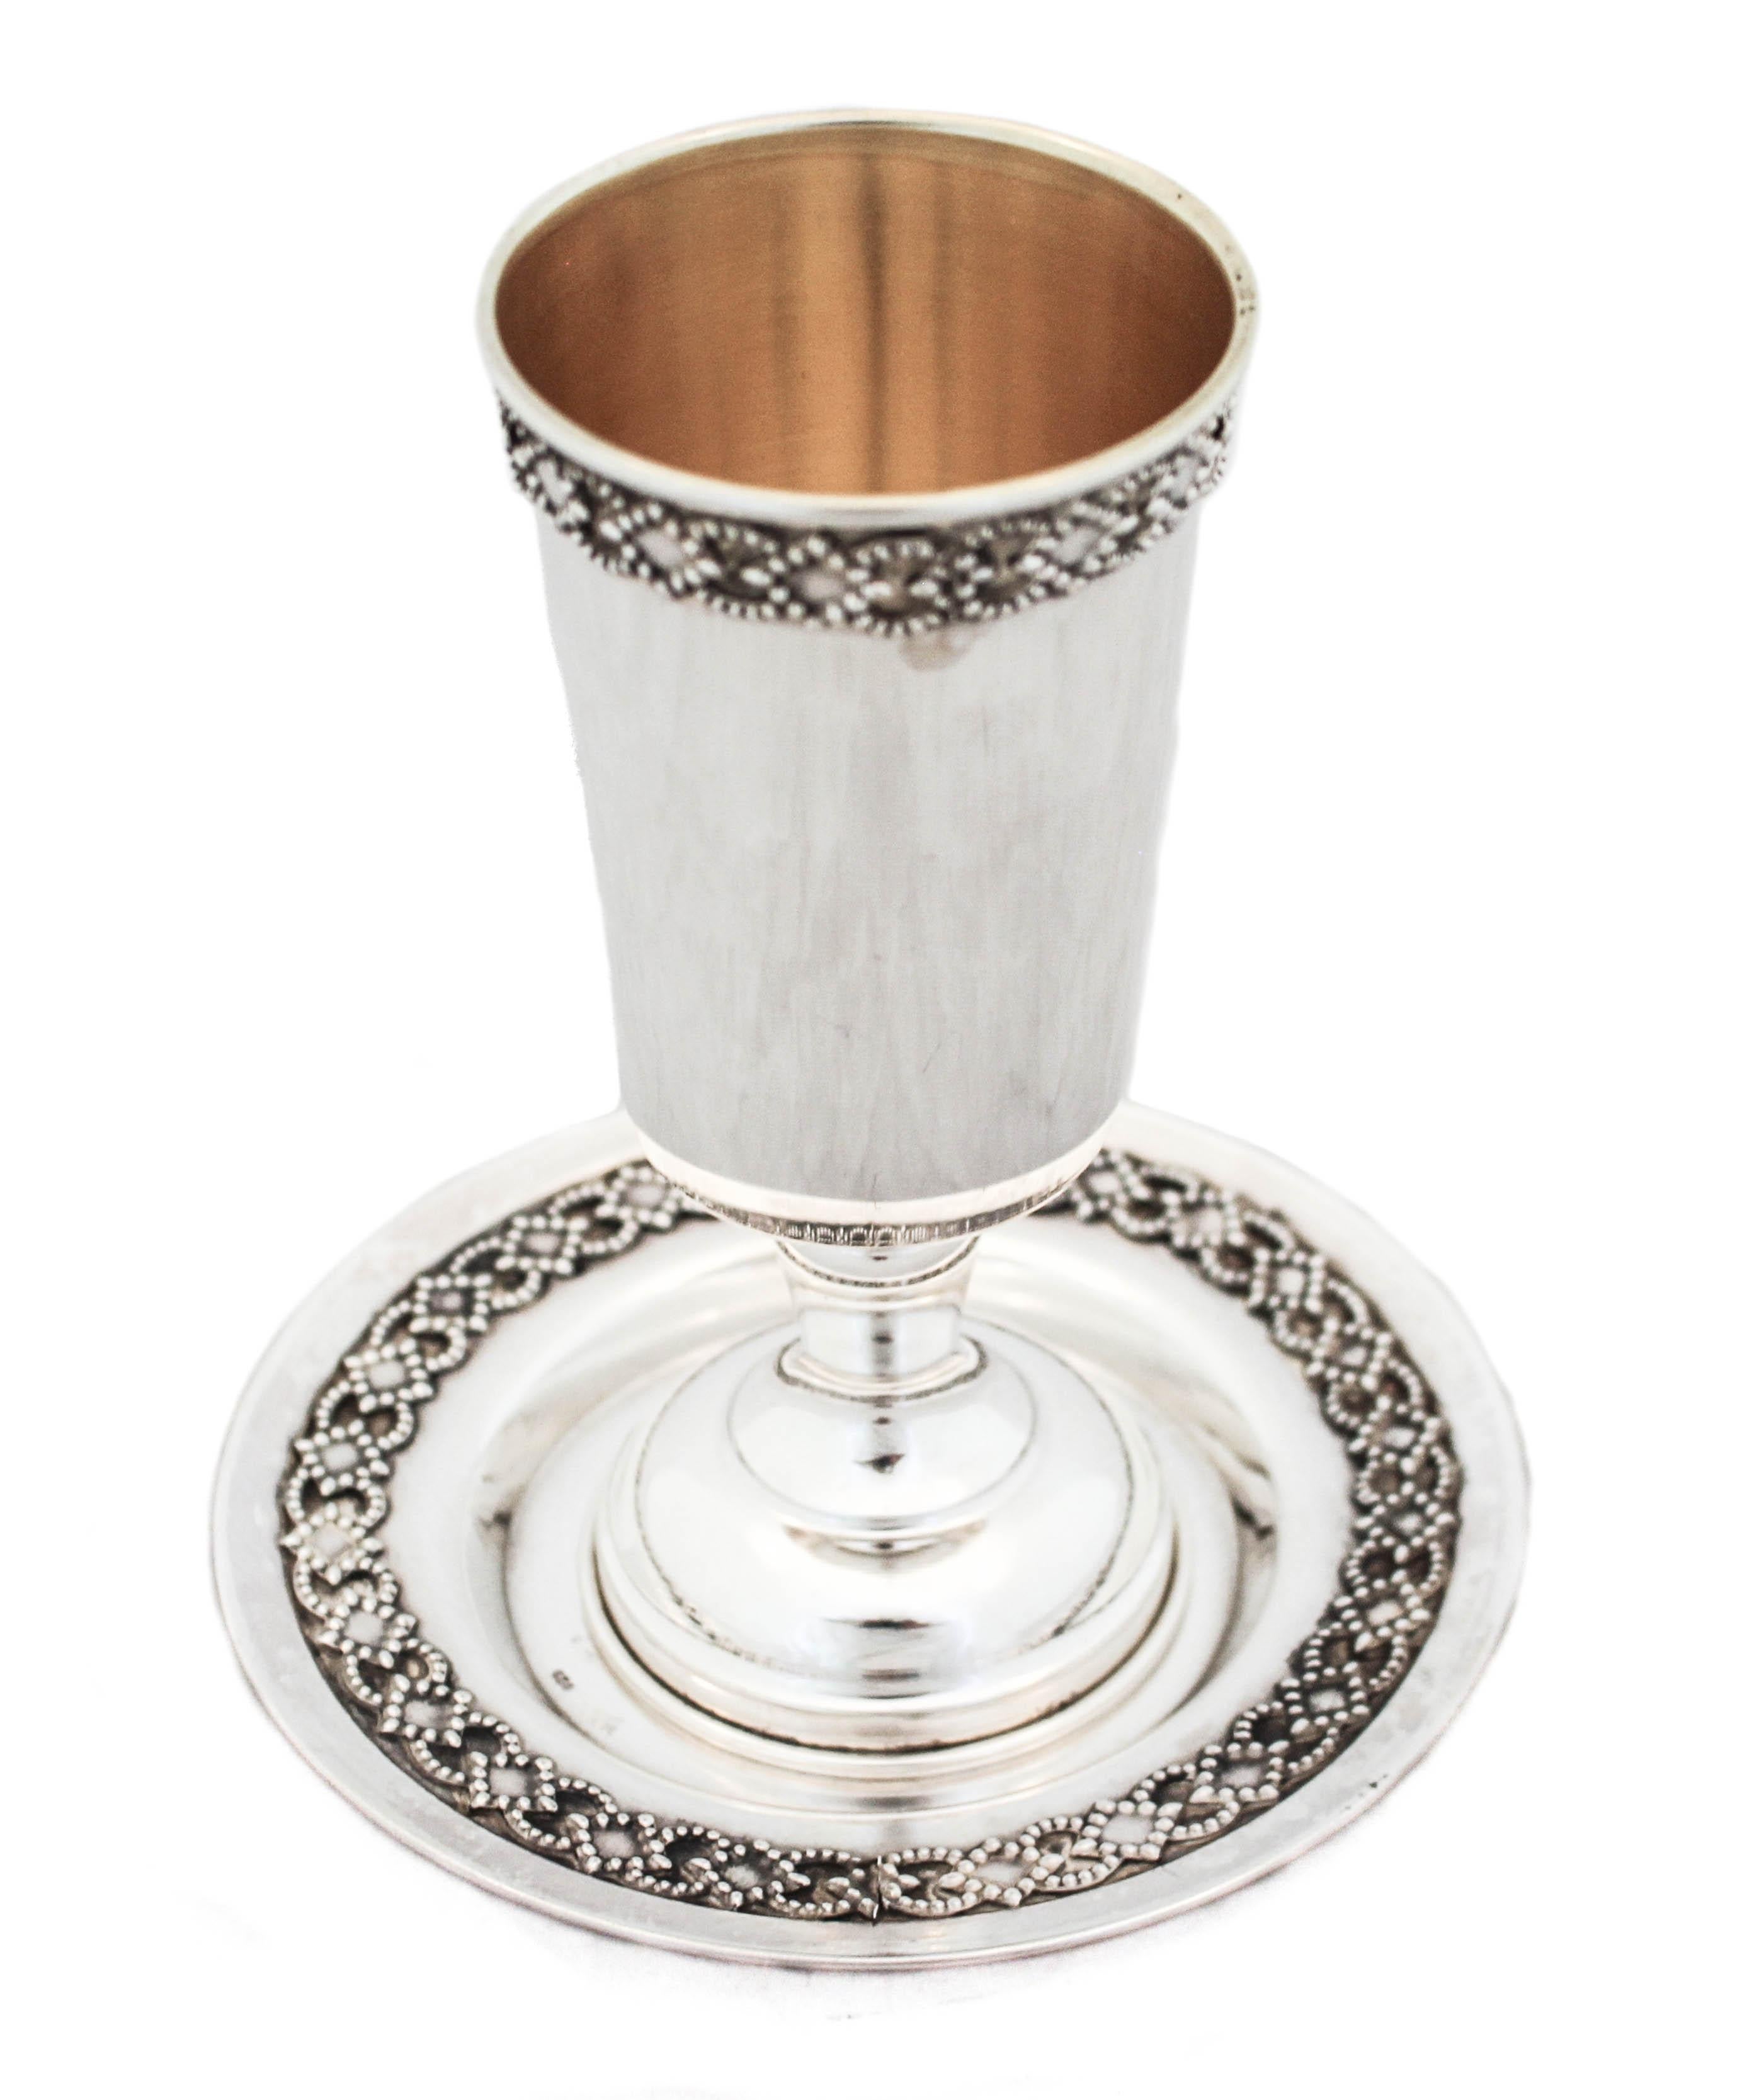 A sterling silver goblet and plate with just a decorative pattern around the top of the cup and the edge of the plate.  A diamond and circular design wraps around the rim of the cup and plate edge to give it just a little work.  A great gift for